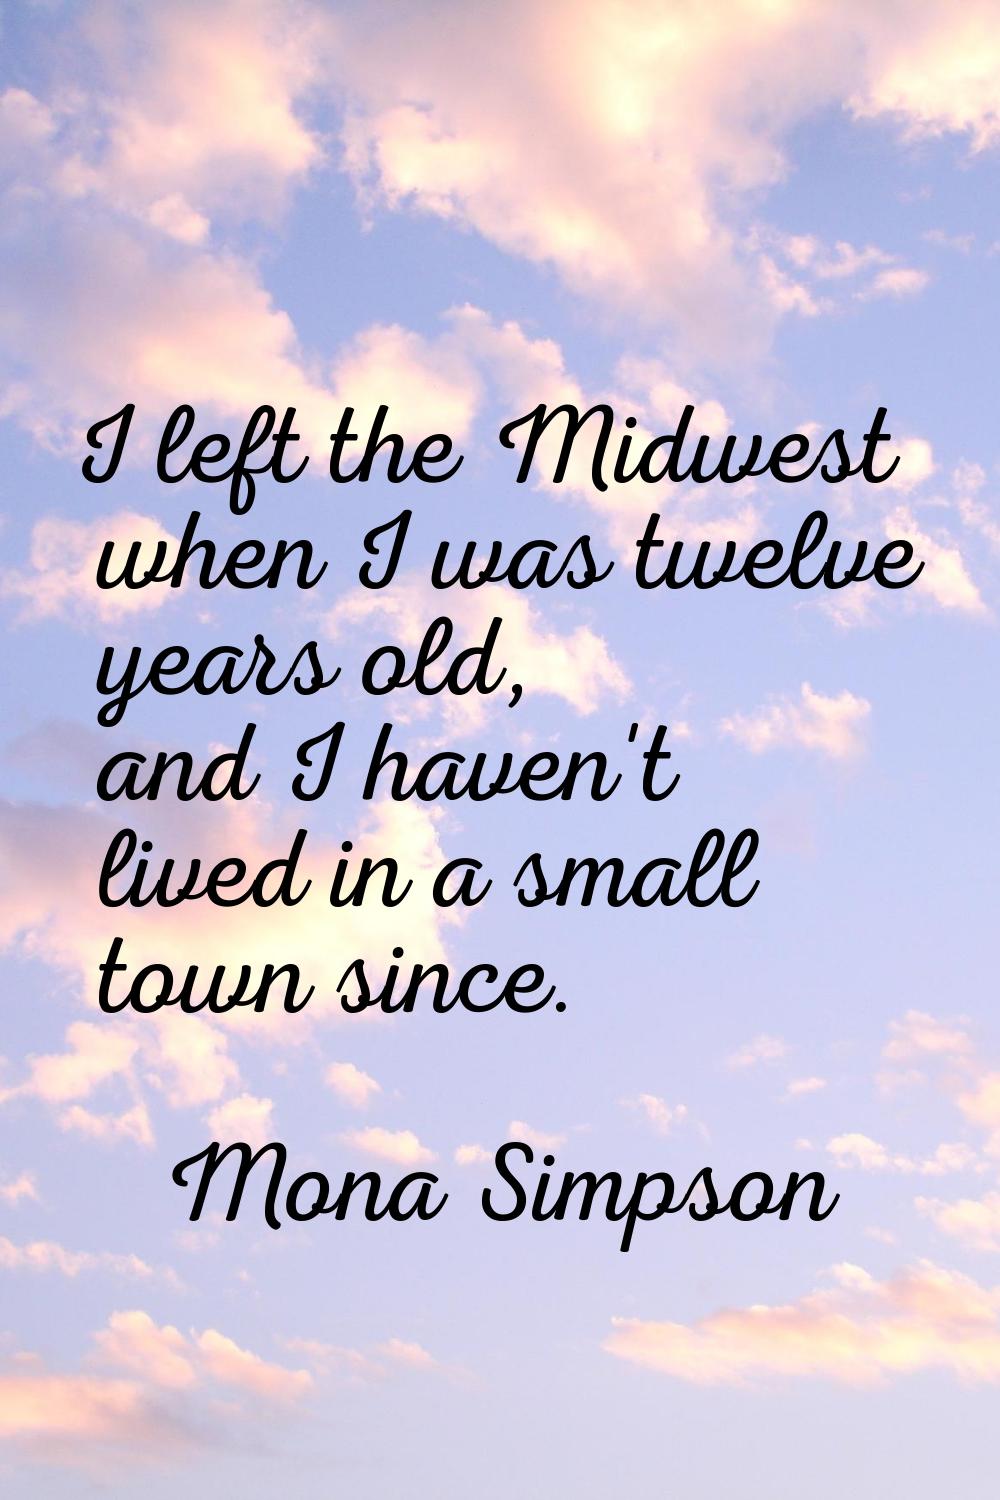 I left the Midwest when I was twelve years old, and I haven't lived in a small town since.